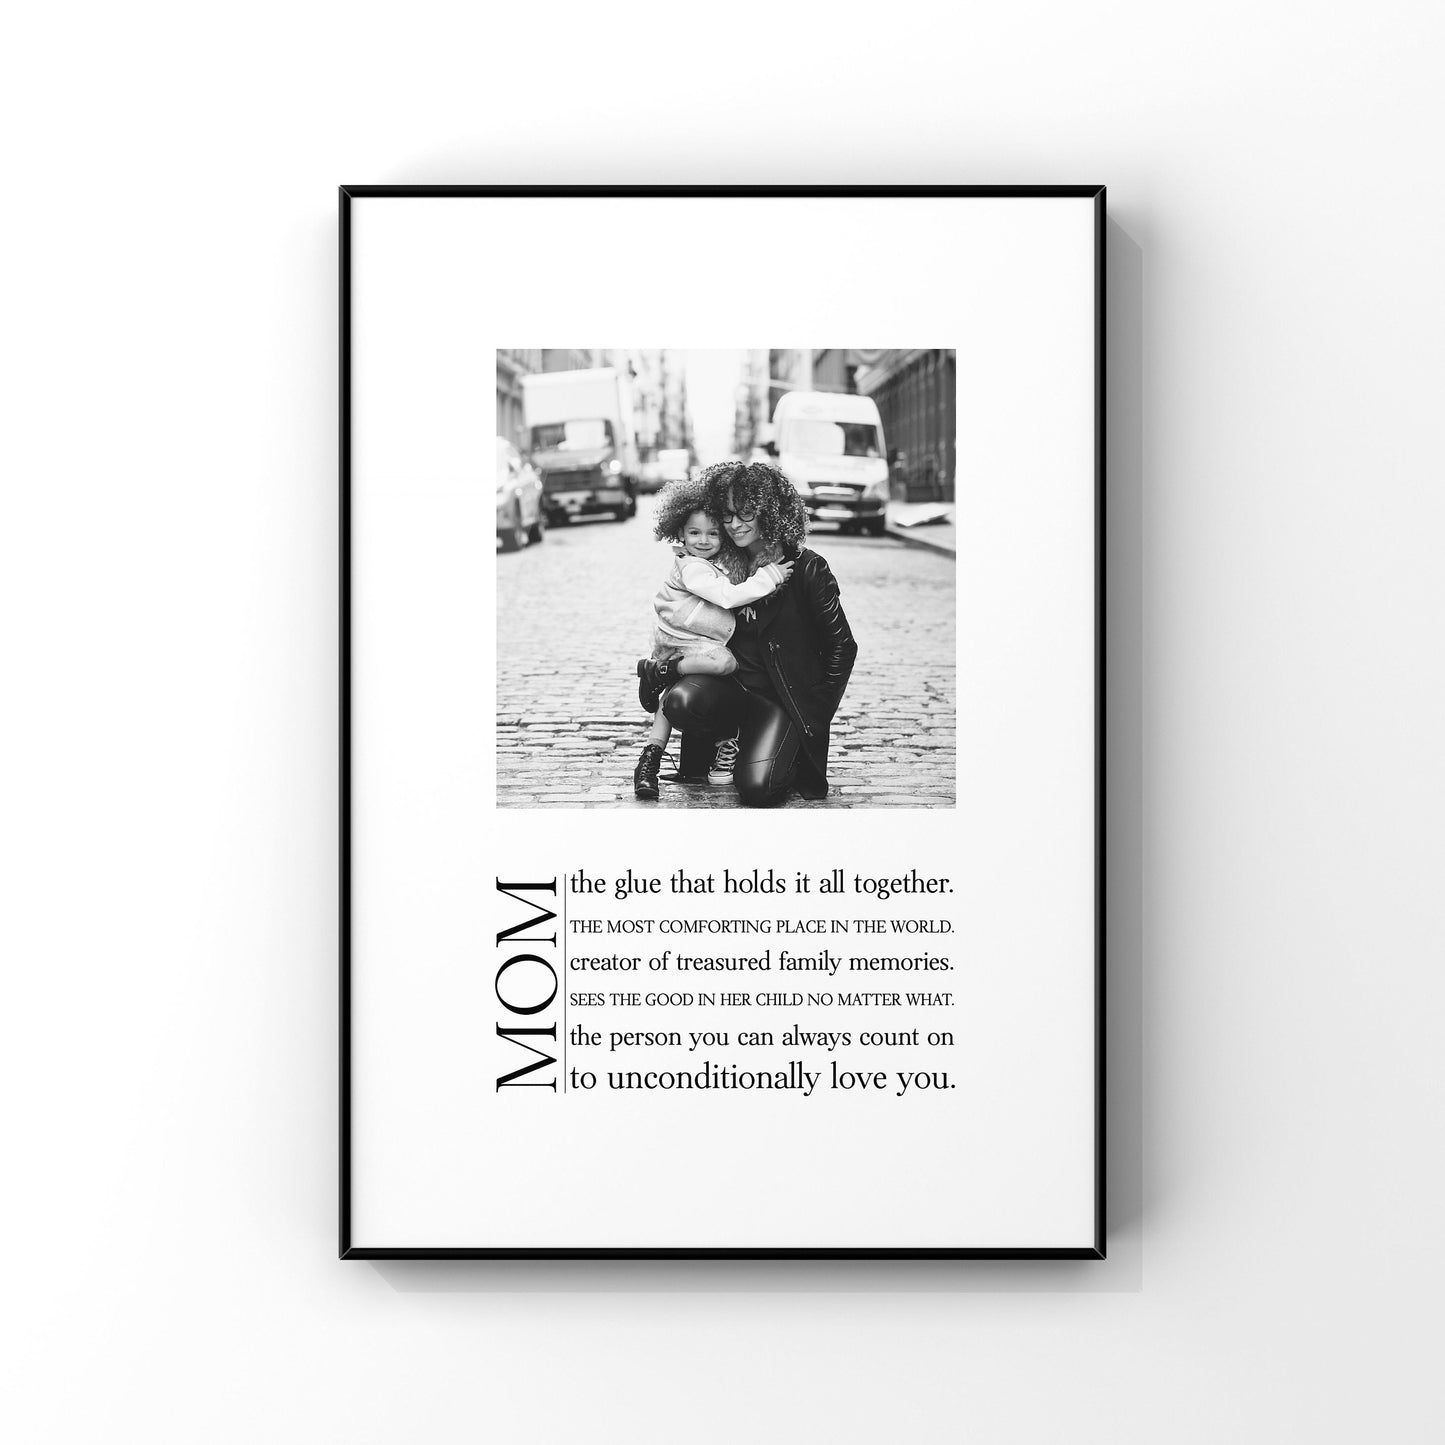 Custom Mom definition,Mom definition print,Definition print,Personalized gift for Mom,Photo gift for Mom,Mother’s Day gift,Mom birthday gift